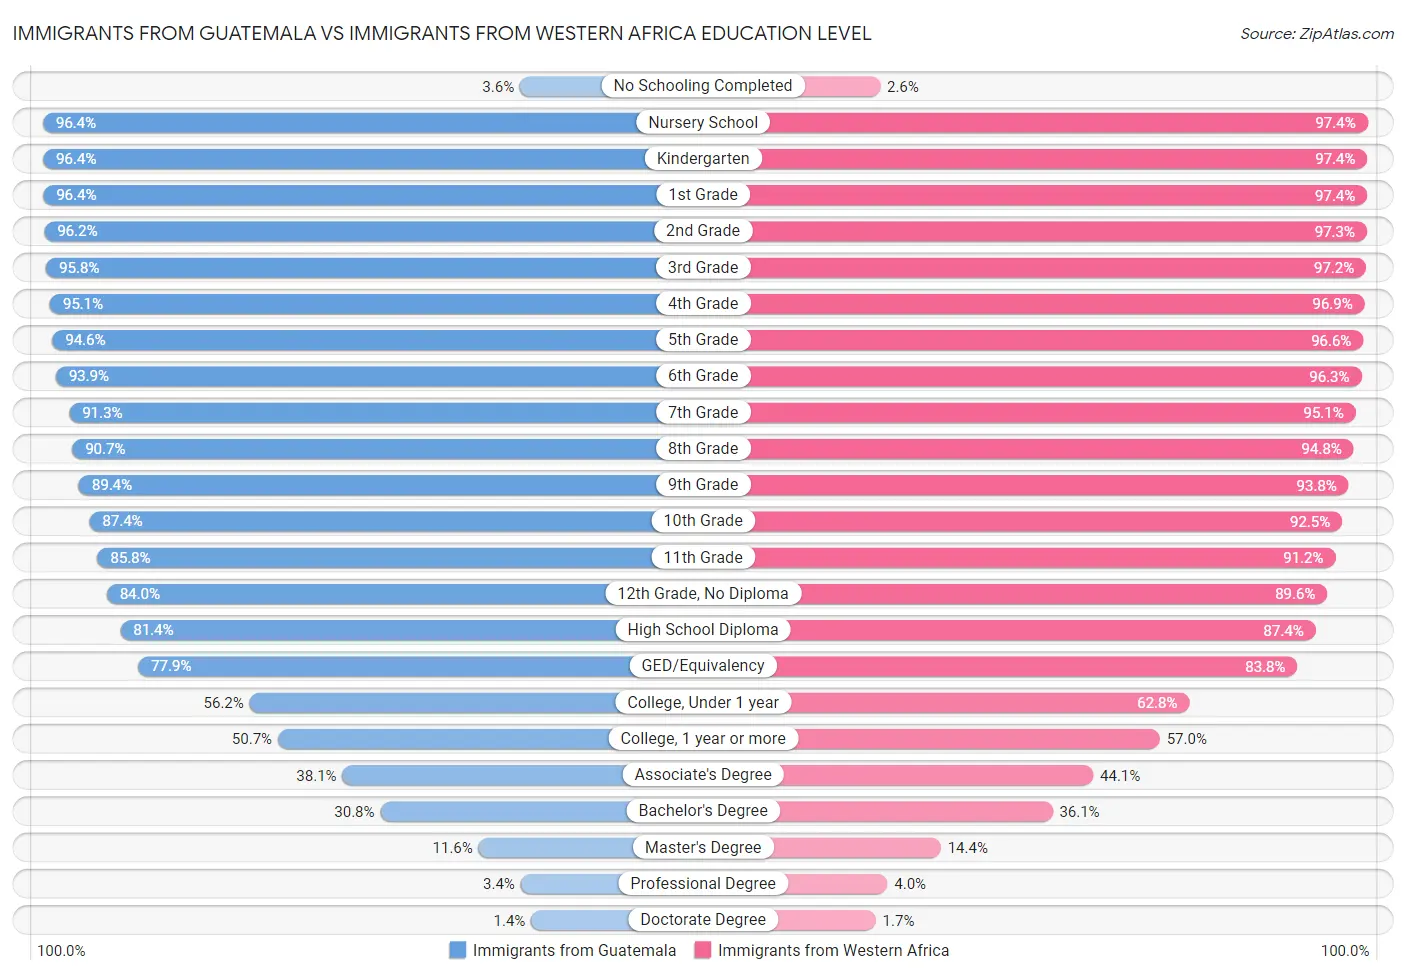 Immigrants from Guatemala vs Immigrants from Western Africa Education Level